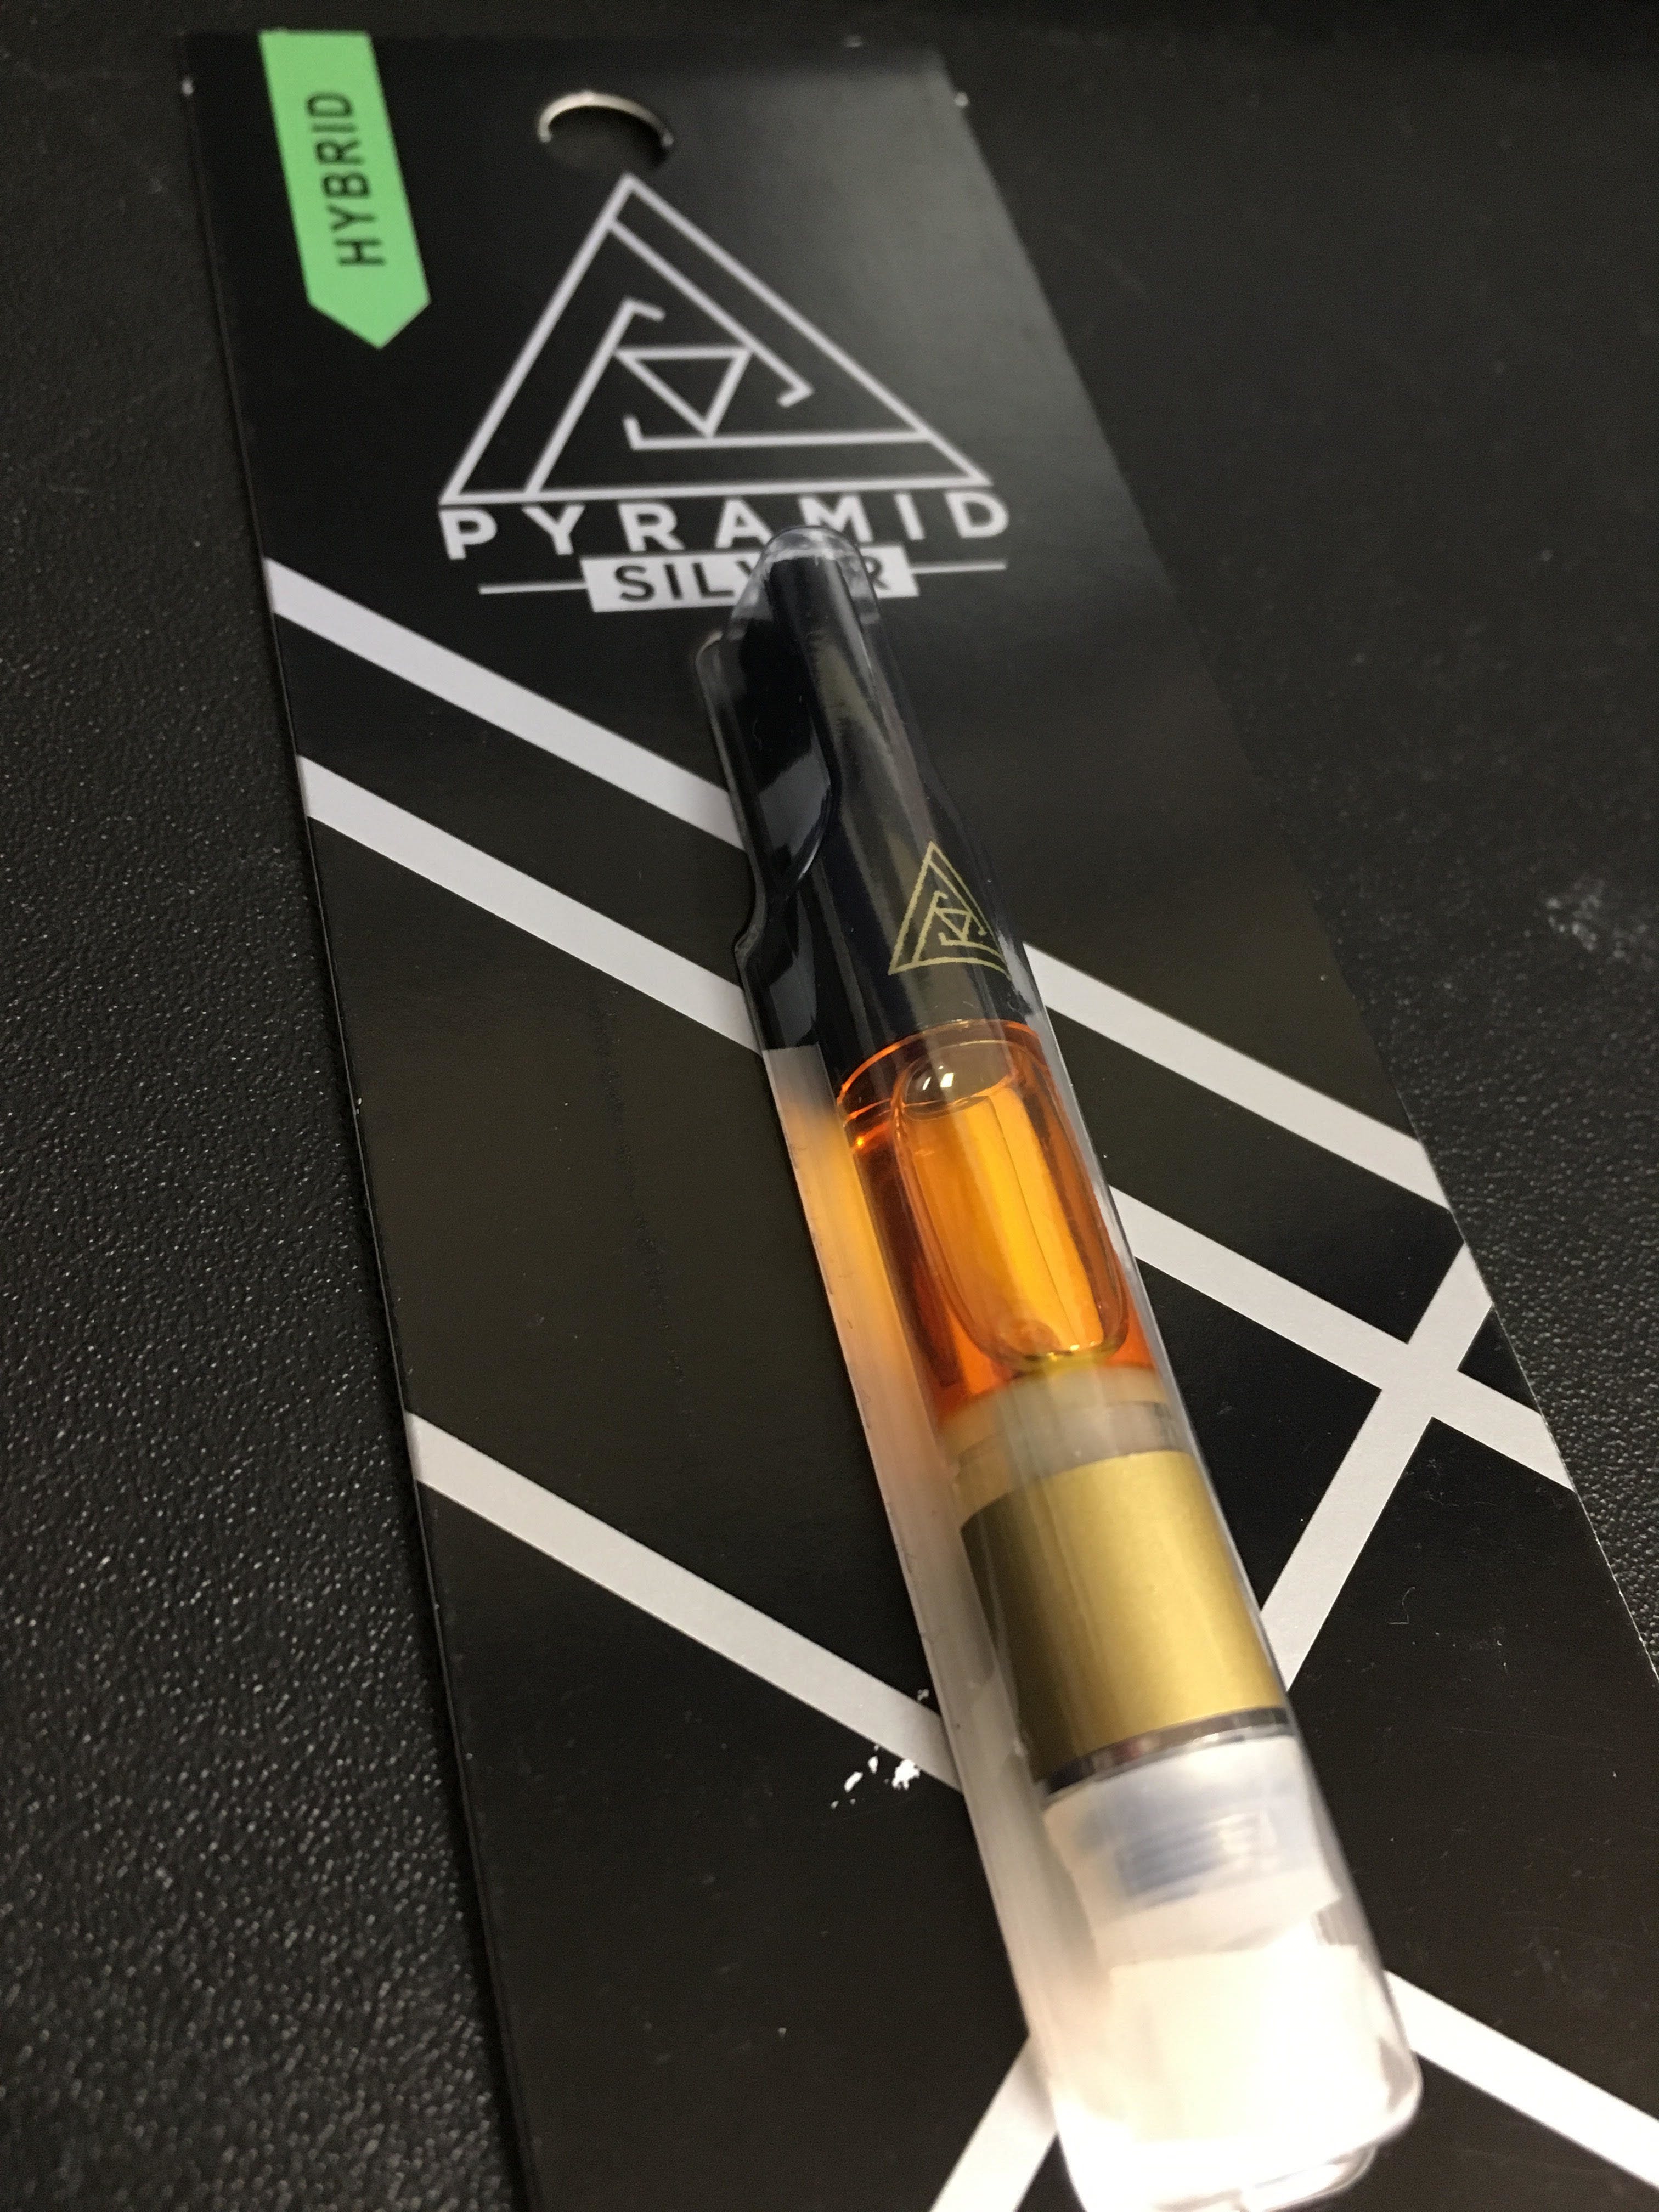 concentrate-pyramid-silver-vape-cartridges-250mg